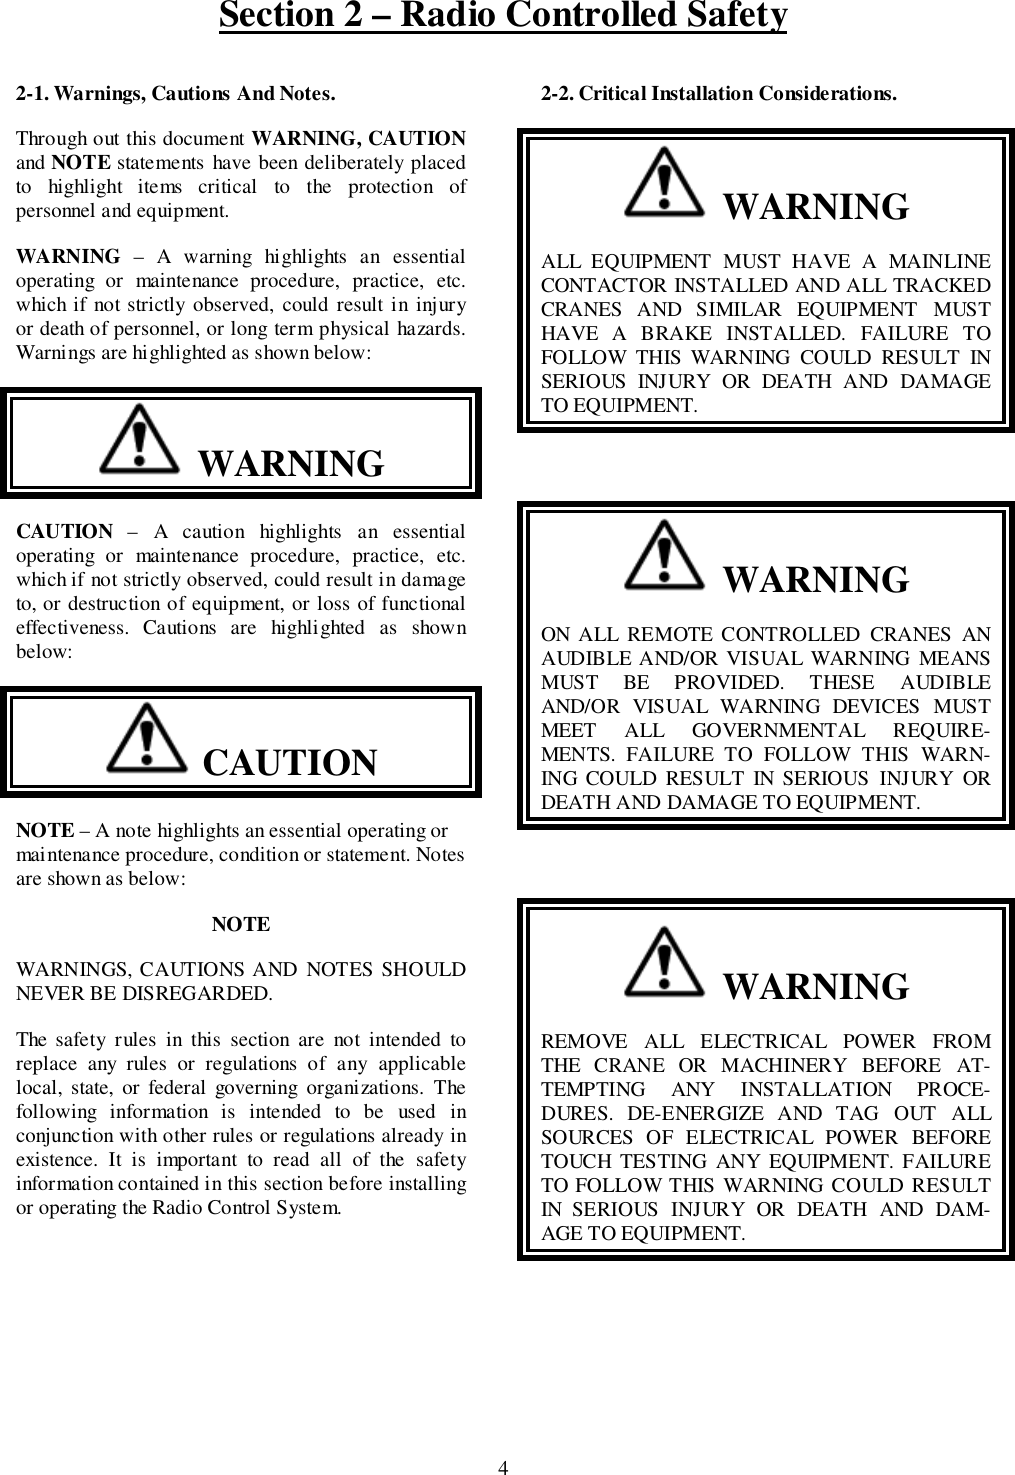 Section 2 – Radio Controlled Safety42-1. Warnings, Cautions And Notes.Through out this document WARNING, CAUTIONand NOTE statements have been deliberately placedto highlight items critical to the protection ofpersonnel and equipment.WARNING – A warning highlights an essentialoperating or maintenance procedure, practice, etc.which if not strictly observed, could result in injuryor death of personnel, or long term physical hazards.Warnings are highlighted as shown below:  WARNINGCAUTION – A caution highlights an essentialoperating or maintenance procedure, practice, etc.which if not strictly observed, could result in damageto, or destruction of equipment, or loss of functionaleffectiveness. Cautions are highlighted as shownbelow:  CAUTIONNOTE – A note highlights an essential operating ormaintenance procedure, condition or statement. Notesare shown as below:NOTEWARNINGS, CAUTIONS AND NOTES SHOULDNEVER BE DISREGARDED.The safety rules in this section are not intended toreplace any rules or regulations of any applicablelocal, state, or federal governing organizations. Thefollowing information is intended to be used inconjunction with other rules or regulations already inexistence. It is important to read all of the safetyinformation contained in this section before installingor operating the Radio Control System.2-2. Critical Installation Considerations.  WARNINGALL EQUIPMENT MUST HAVE A MAINLINECONTACTOR INSTALLED AND ALL TRACKEDCRANES AND SIMILAR EQUIPMENT MUSTHAVE A BRAKE INSTALLED. FAILURE TOFOLLOW THIS WARNING COULD RESULT INSERIOUS INJURY OR DEATH AND DAMAGETO EQUIPMENT.  WARNINGON ALL REMOTE CONTROLLED CRANES ANAUDIBLE AND/OR VISUAL WARNING MEANSMUST BE PROVIDED. THESE AUDIBLEAND/OR VISUAL WARNING DEVICES MUSTMEET ALL GOVERNMENTAL REQUIRE-MENTS. FAILURE TO FOLLOW THIS WARN-ING COULD RESULT IN SERIOUS INJURY ORDEATH AND DAMAGE TO EQUIPMENT.  WARNINGREMOVE ALL ELECTRICAL POWER FROMTHE CRANE OR MACHINERY BEFORE AT-TEMPTING ANY INSTALLATION PROCE-DURES. DE-ENERGIZE AND TAG OUT ALLSOURCES OF ELECTRICAL POWER BEFORETOUCH TESTING ANY EQUIPMENT. FAILURETO FOLLOW THIS WARNING COULD RESULTIN SERIOUS INJURY OR DEATH AND DAM-AGE TO EQUIPMENT.